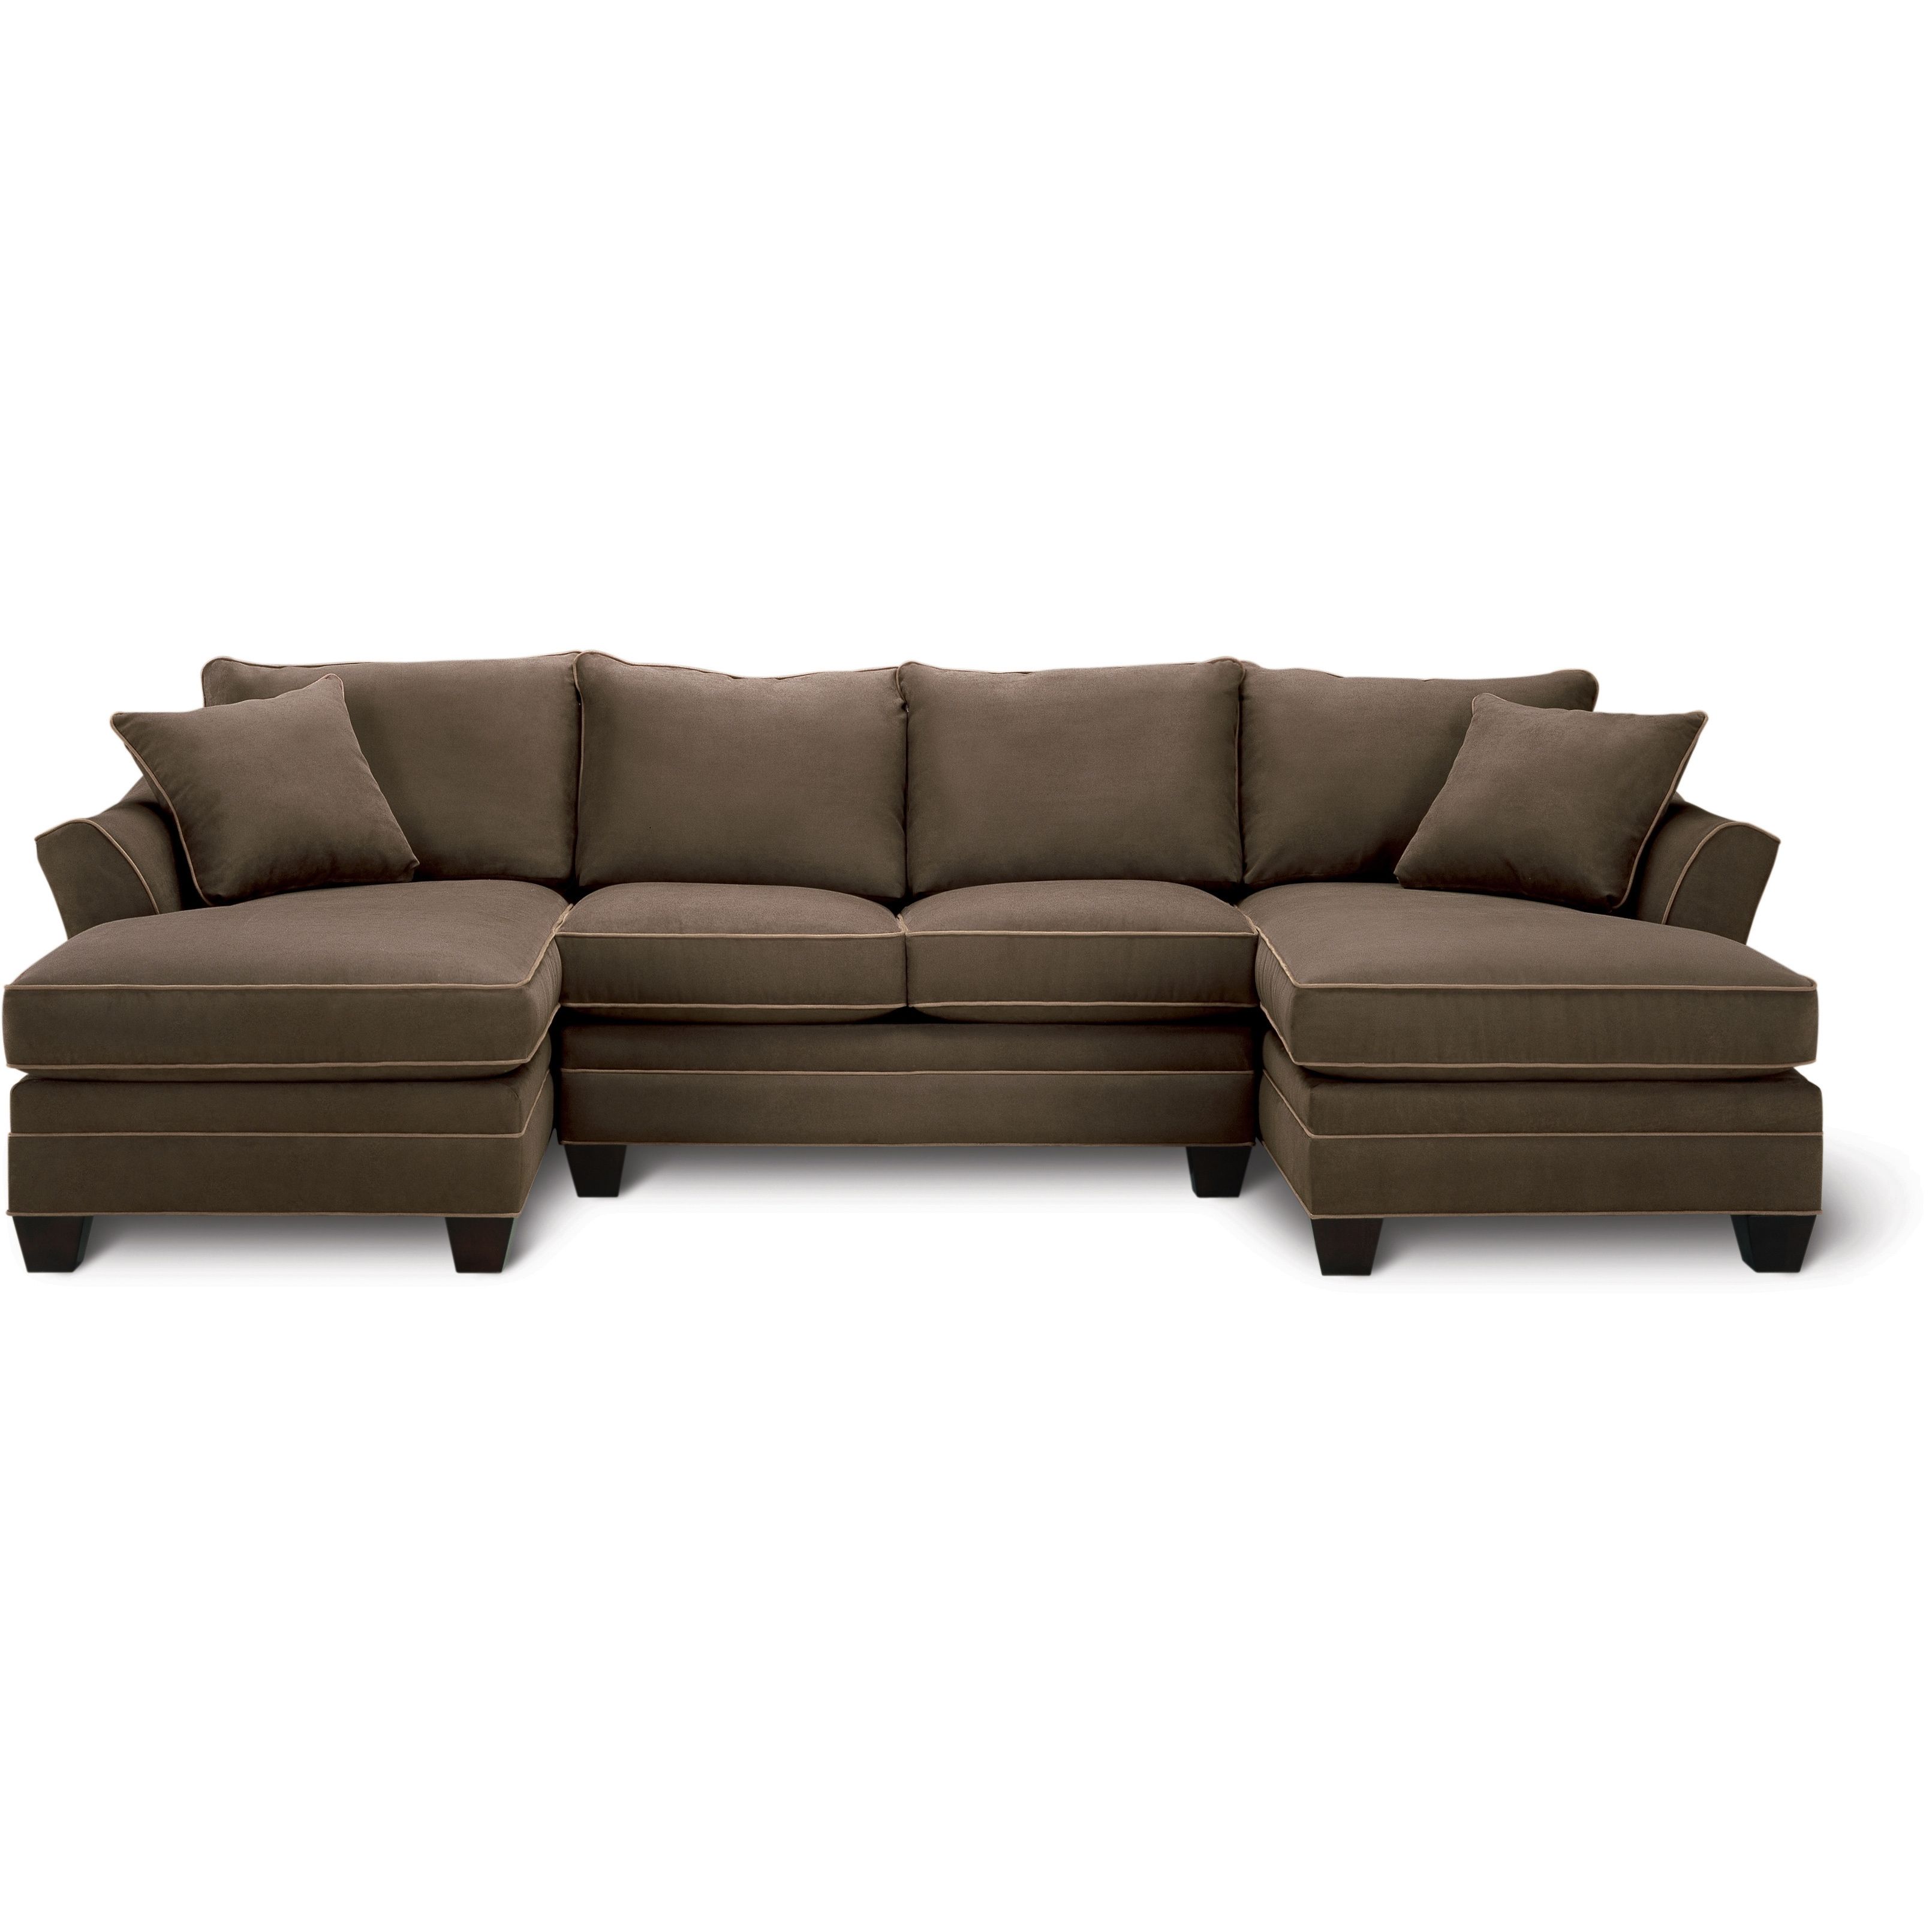 Make The Most Of Your Space With The Dillon Sectional That Offers Within Sectional Sofas Art Van (View 14 of 15)